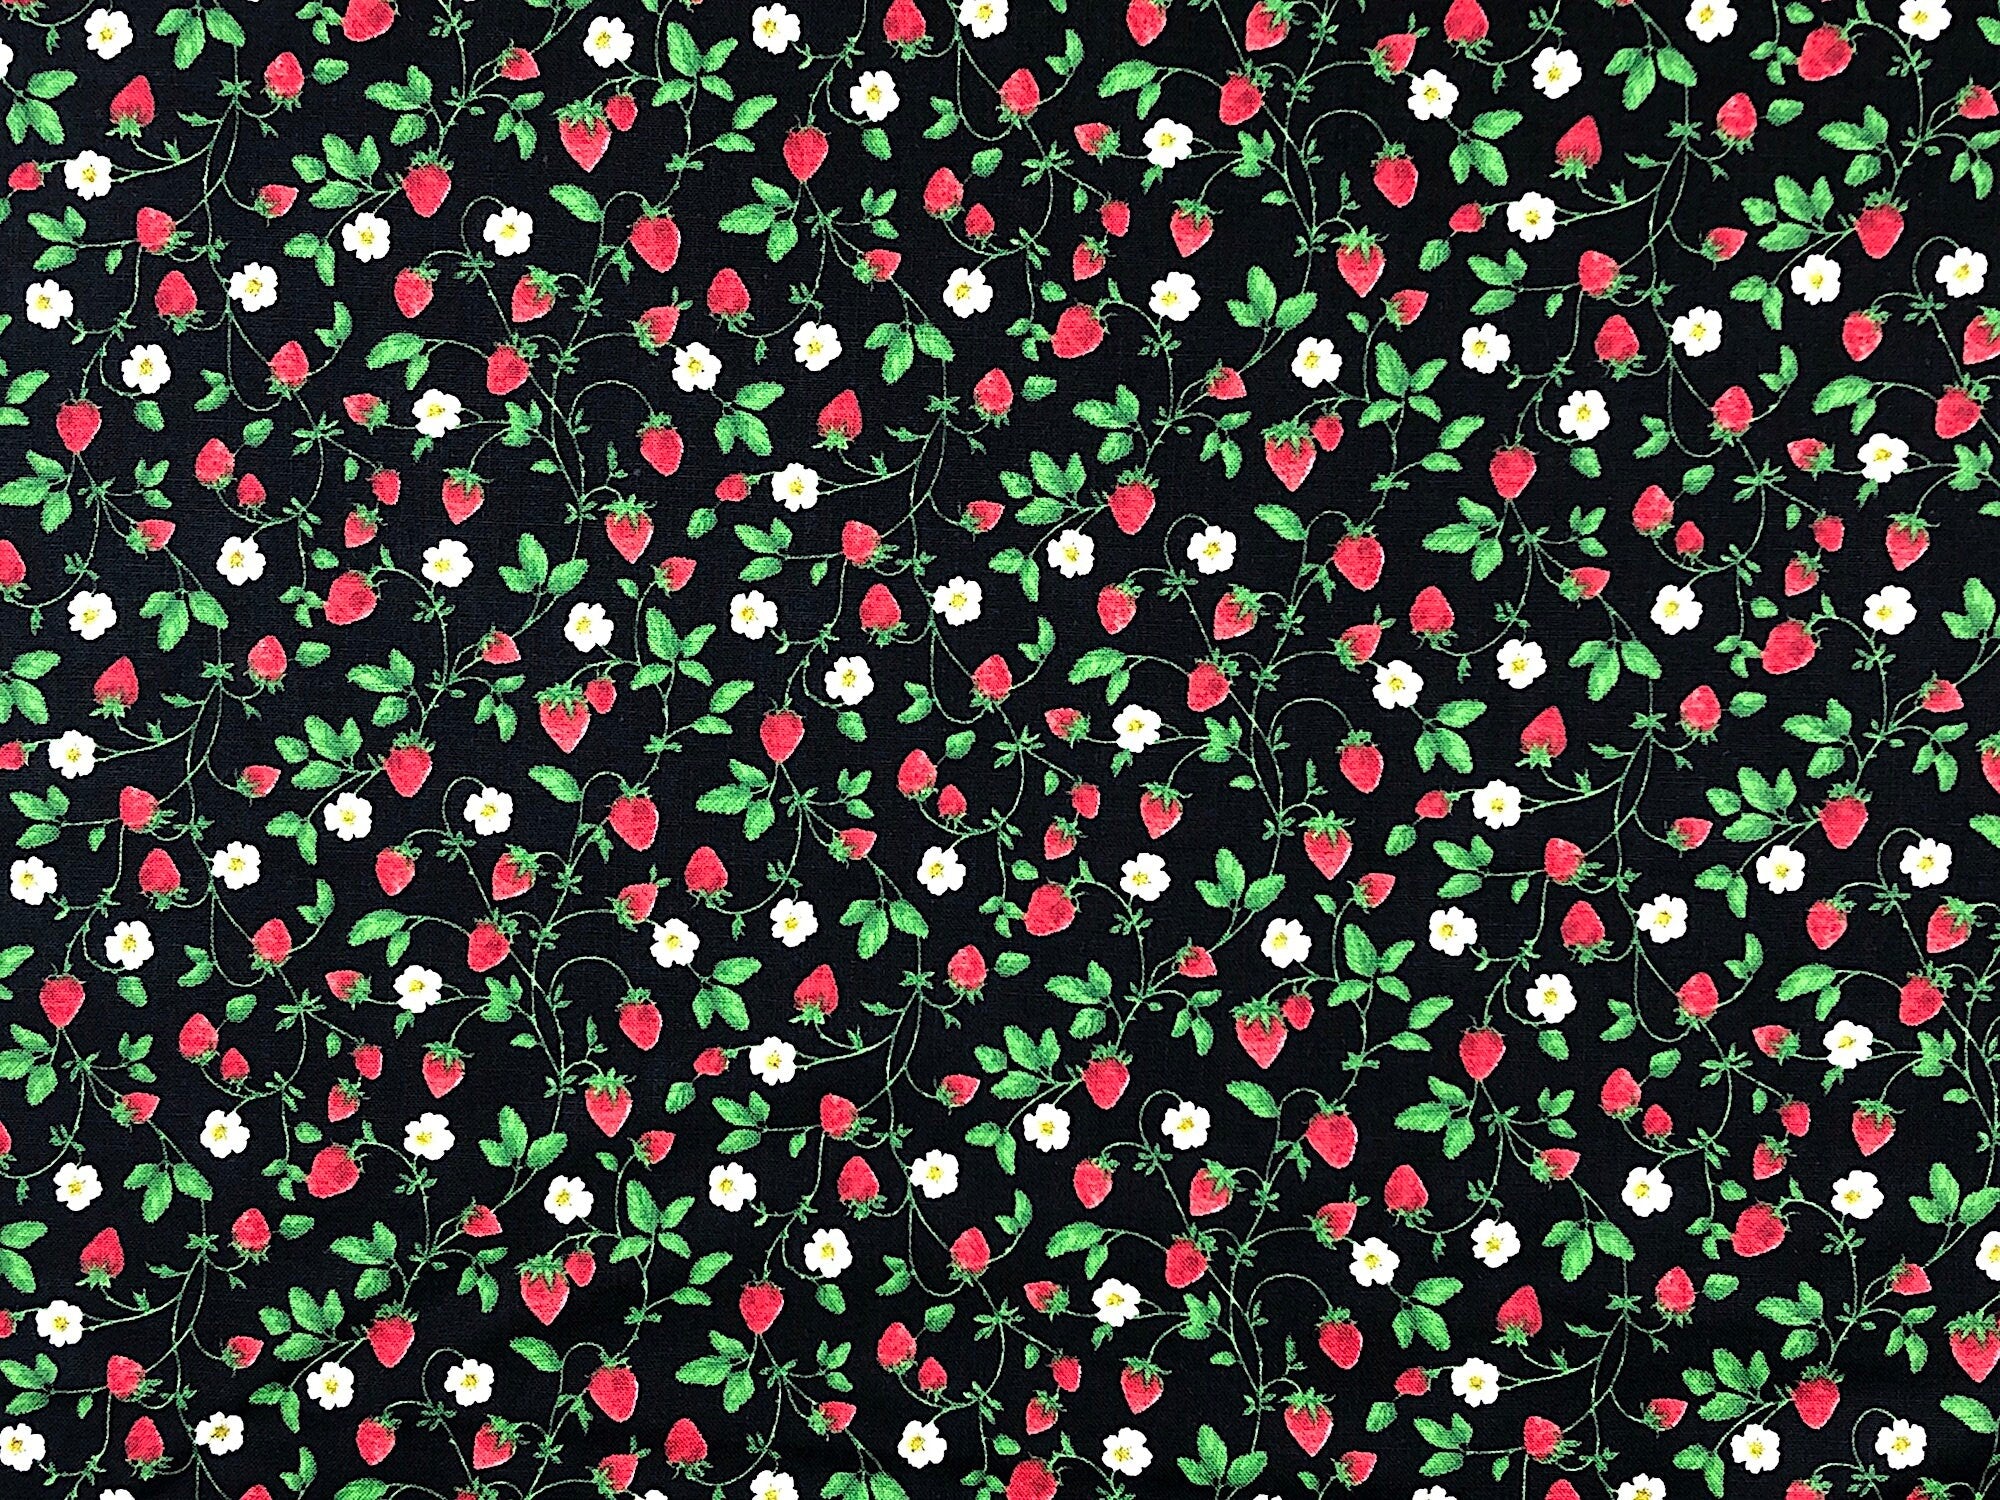 This black fabric is covered with small strawberries on the vine. The vines also have flowers and leaves on them. This fabric is part of the Strawberry Fields Collection